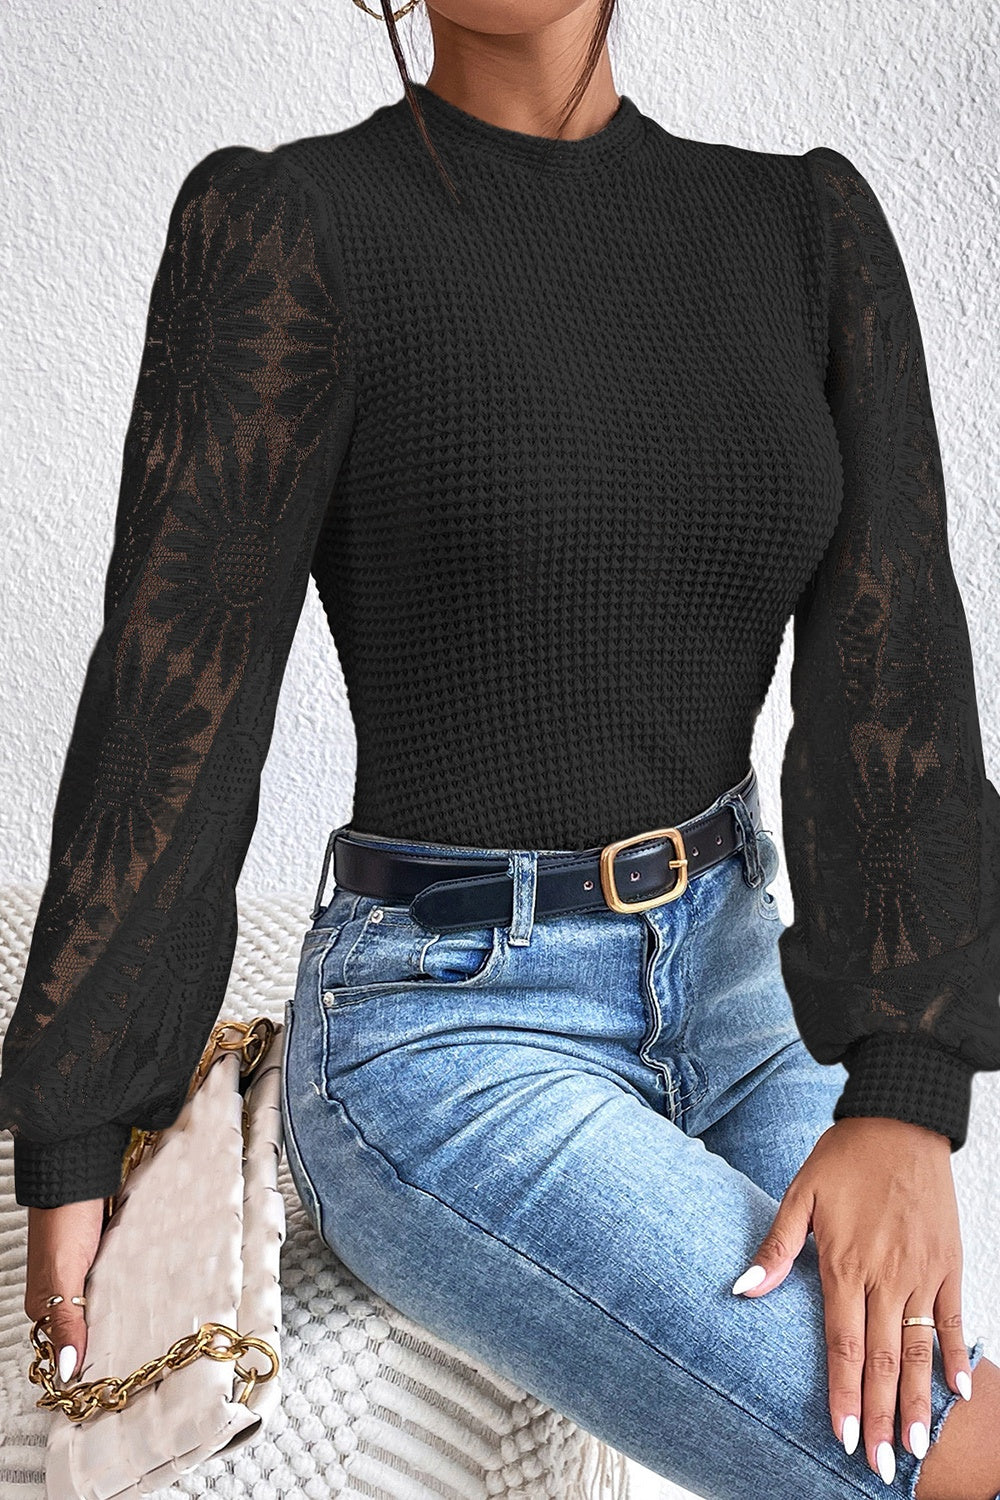 Floral Lace Detail Lantern Sleeve Blouse - Women’s Clothing & Accessories - Shirts & Tops - 5 - 2024